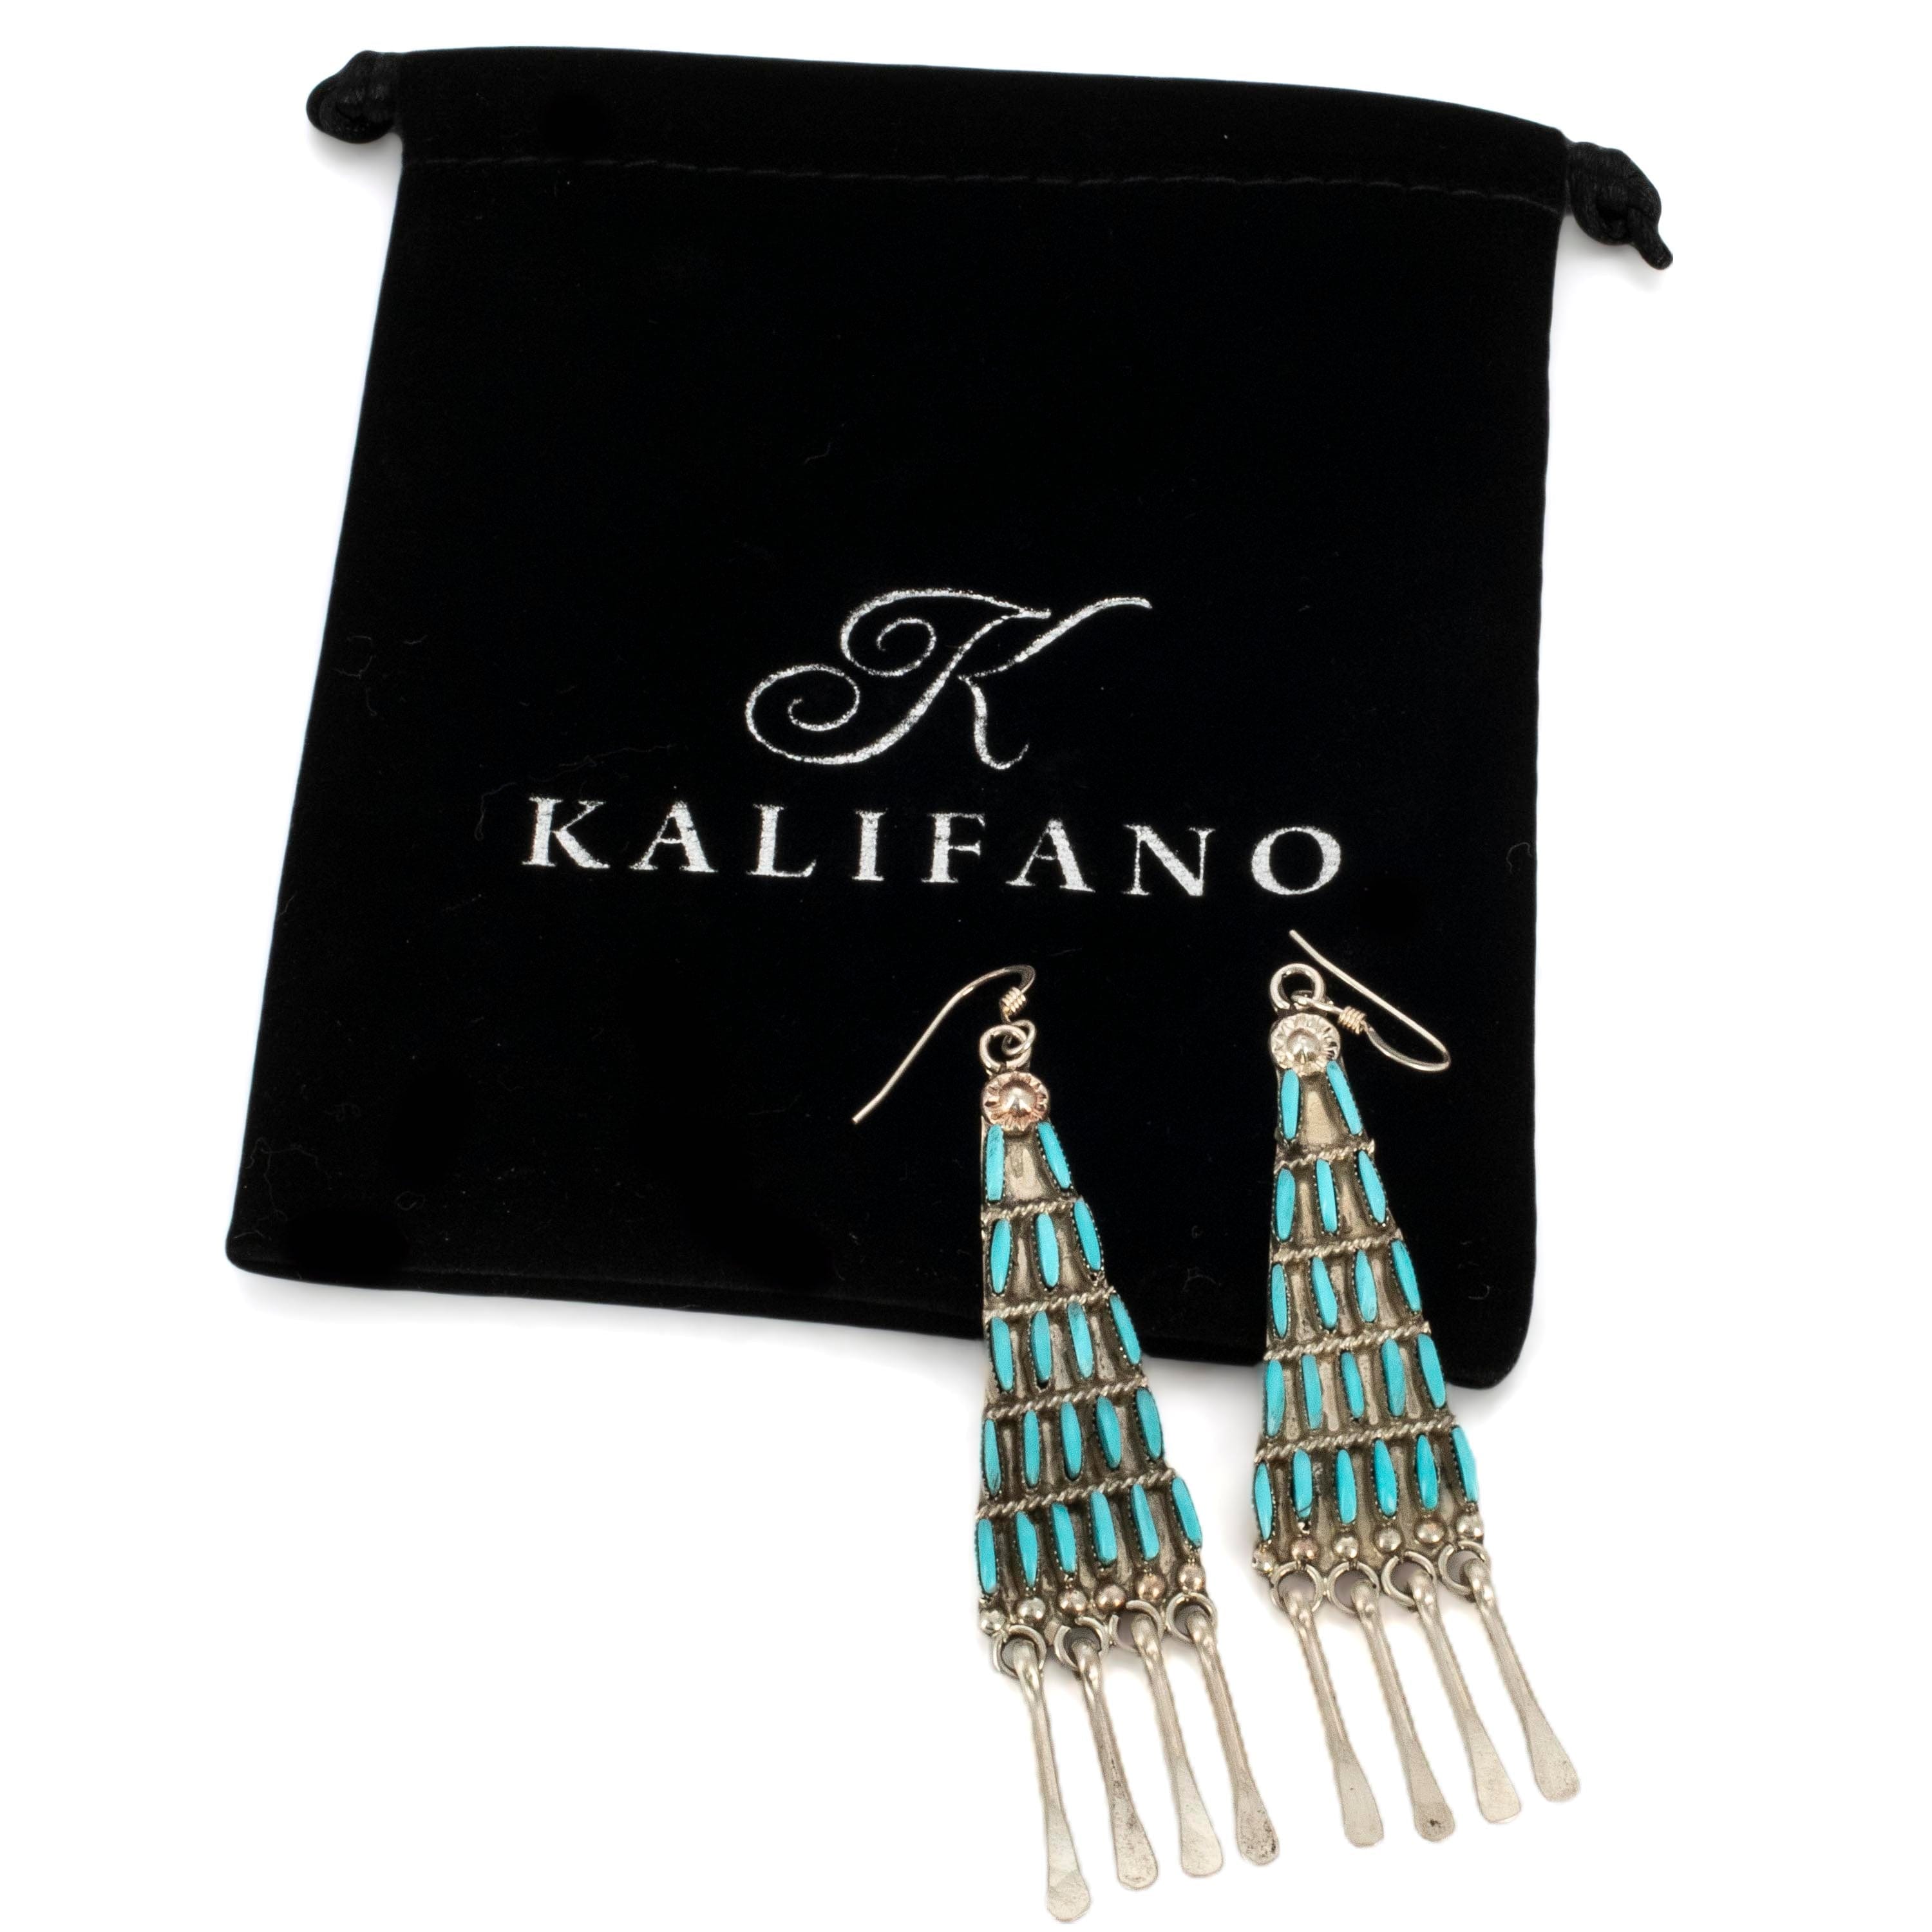 Kalifano Native American Jewelry Kingman Turquoise Zuni Needle Point Triangle Dangly USA Native American Made Sterling Silver Earrings NAE1100.004